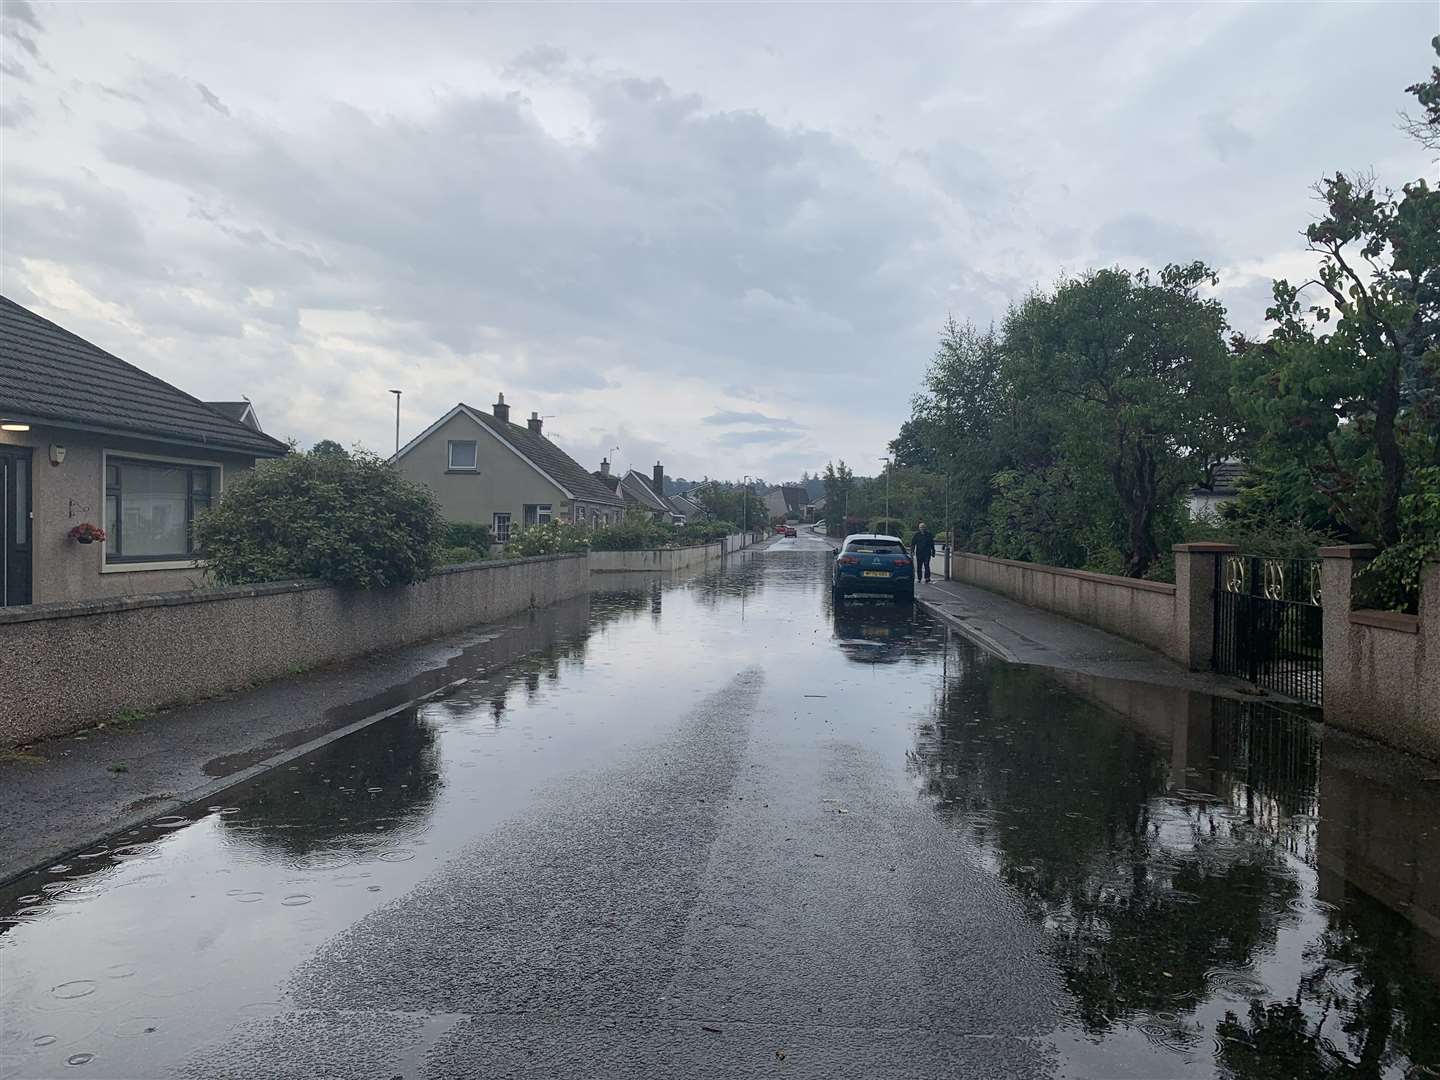 Several areas of Forres have been struck by flooding in recent years.